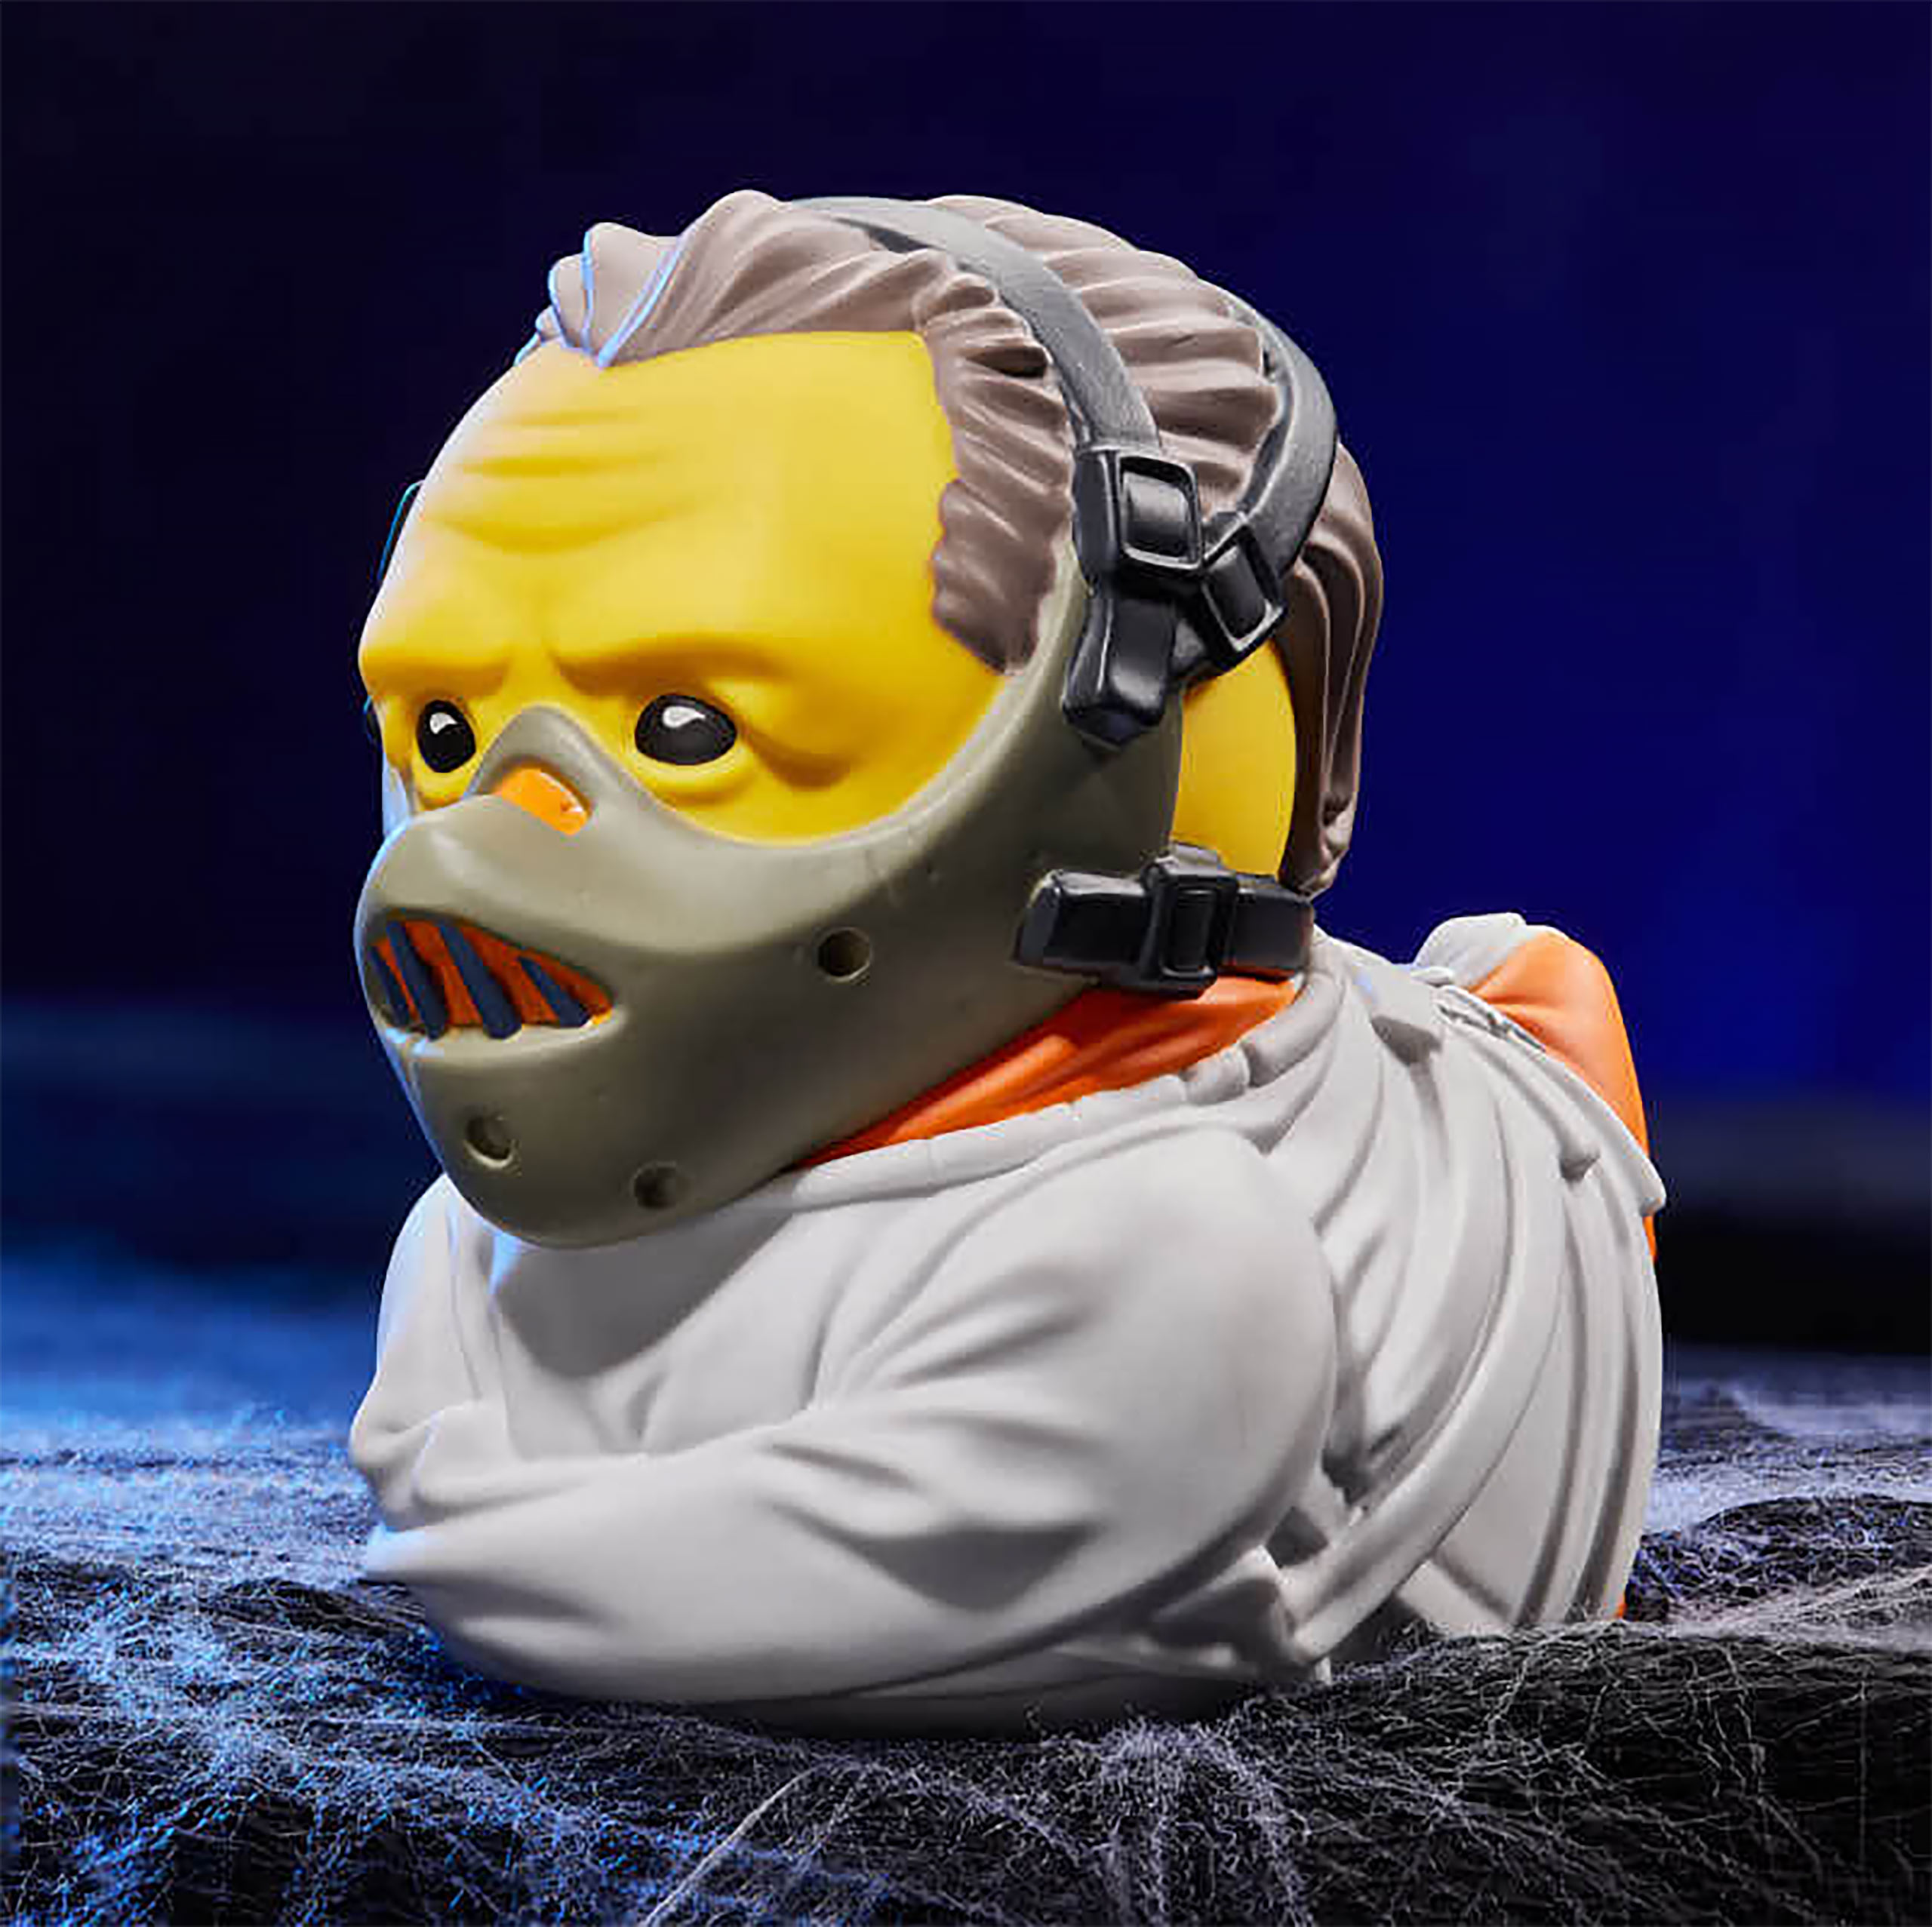 Silence of the Lambs - Hannibal Lecter TUBBZ Decorative Duck